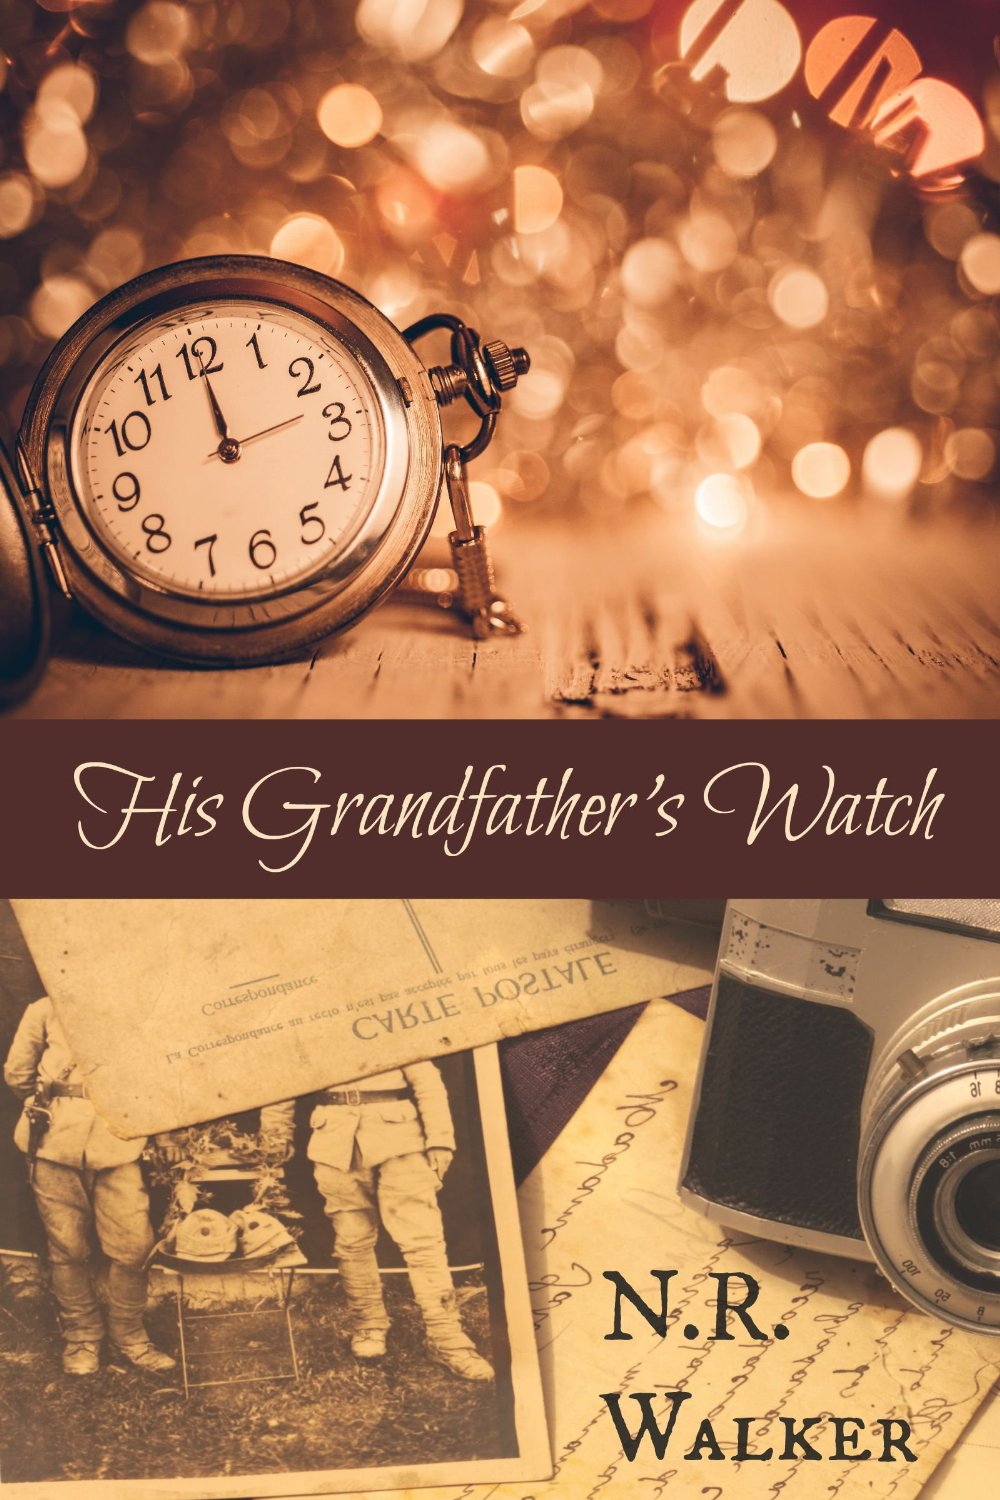 His Grandfather’s Watch by N.R. Walker